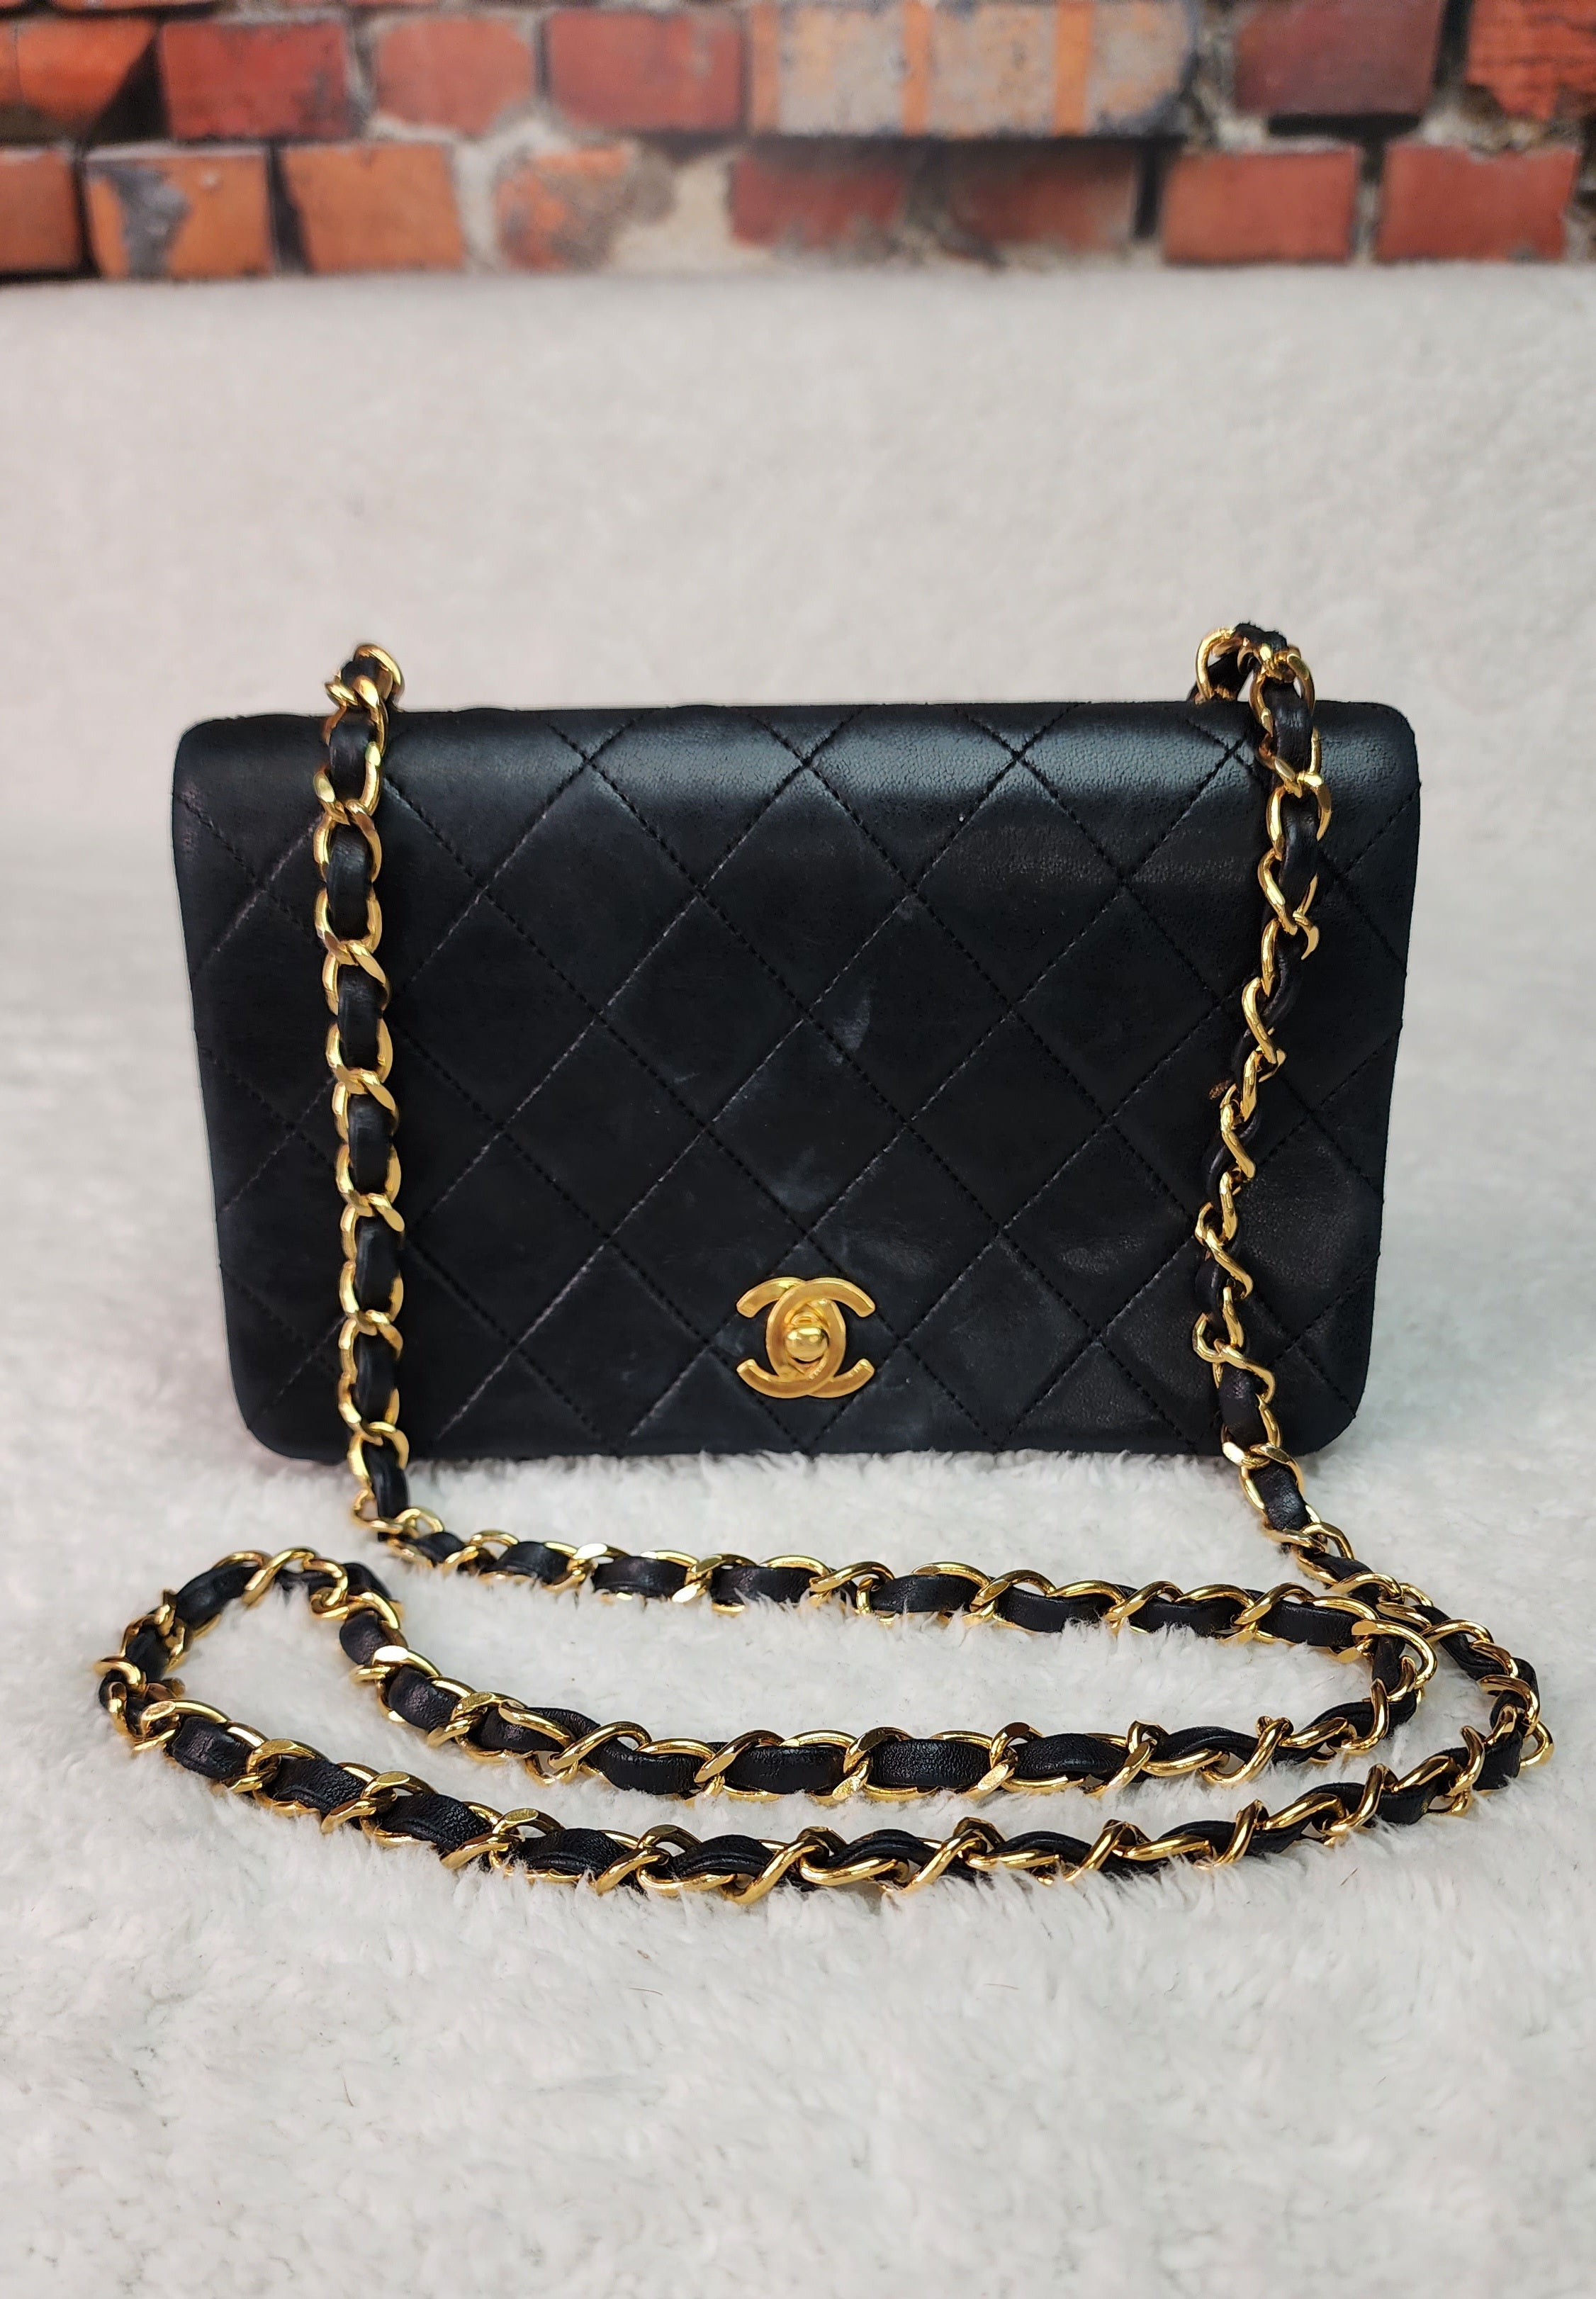 Chanel Petit Timeless “Must Have” shoulder flap bag in leather of